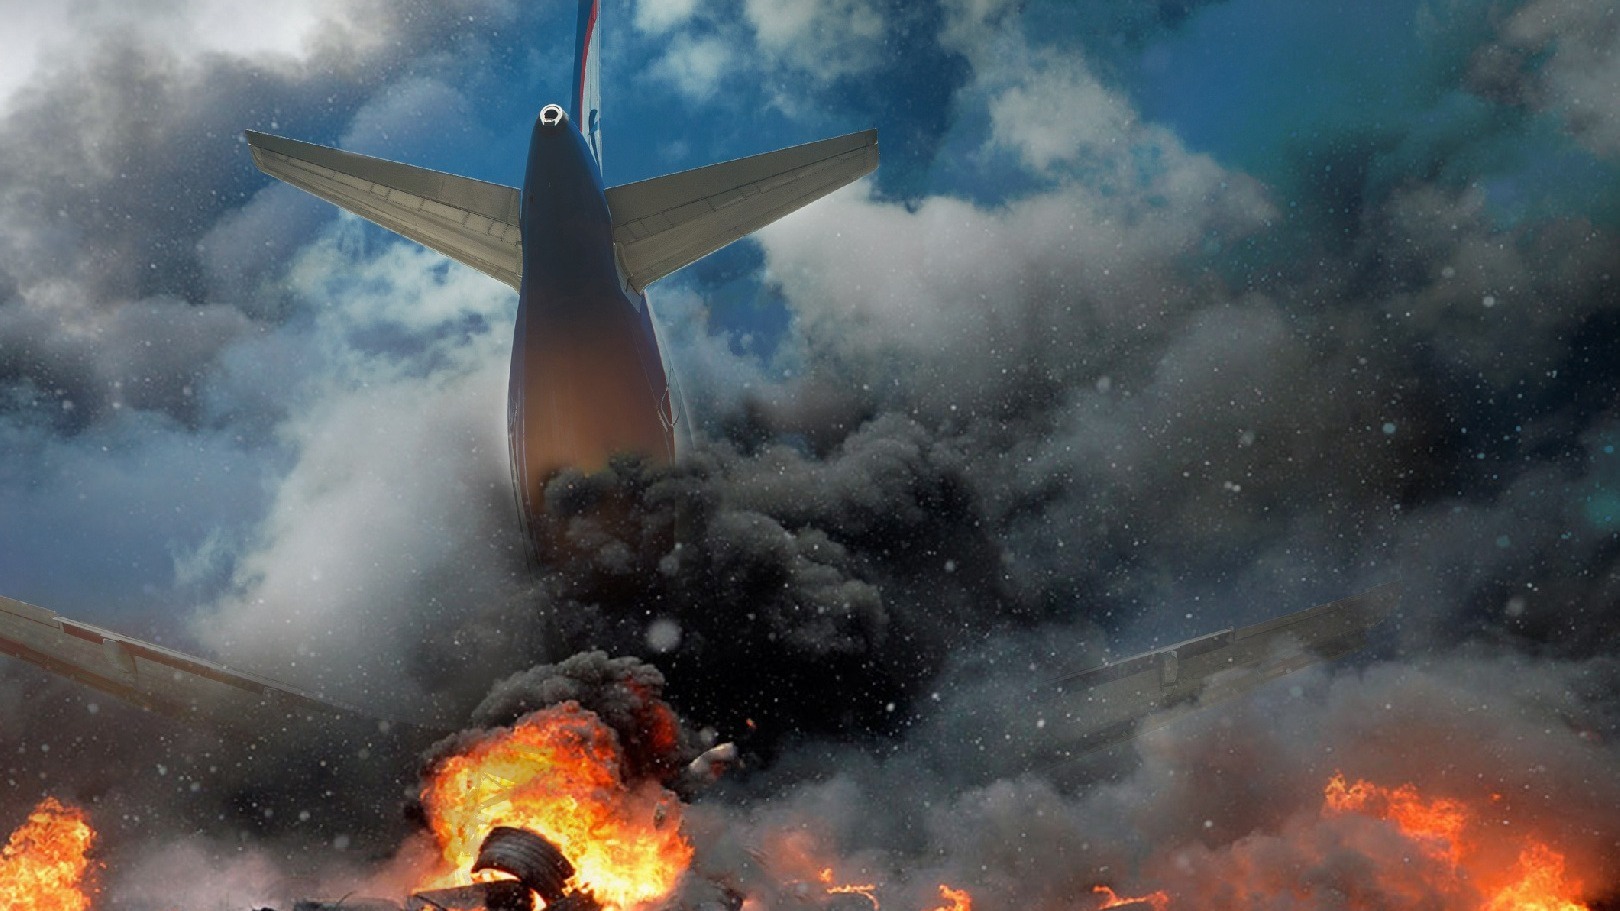 The largest plane crashes in which famous politicians died